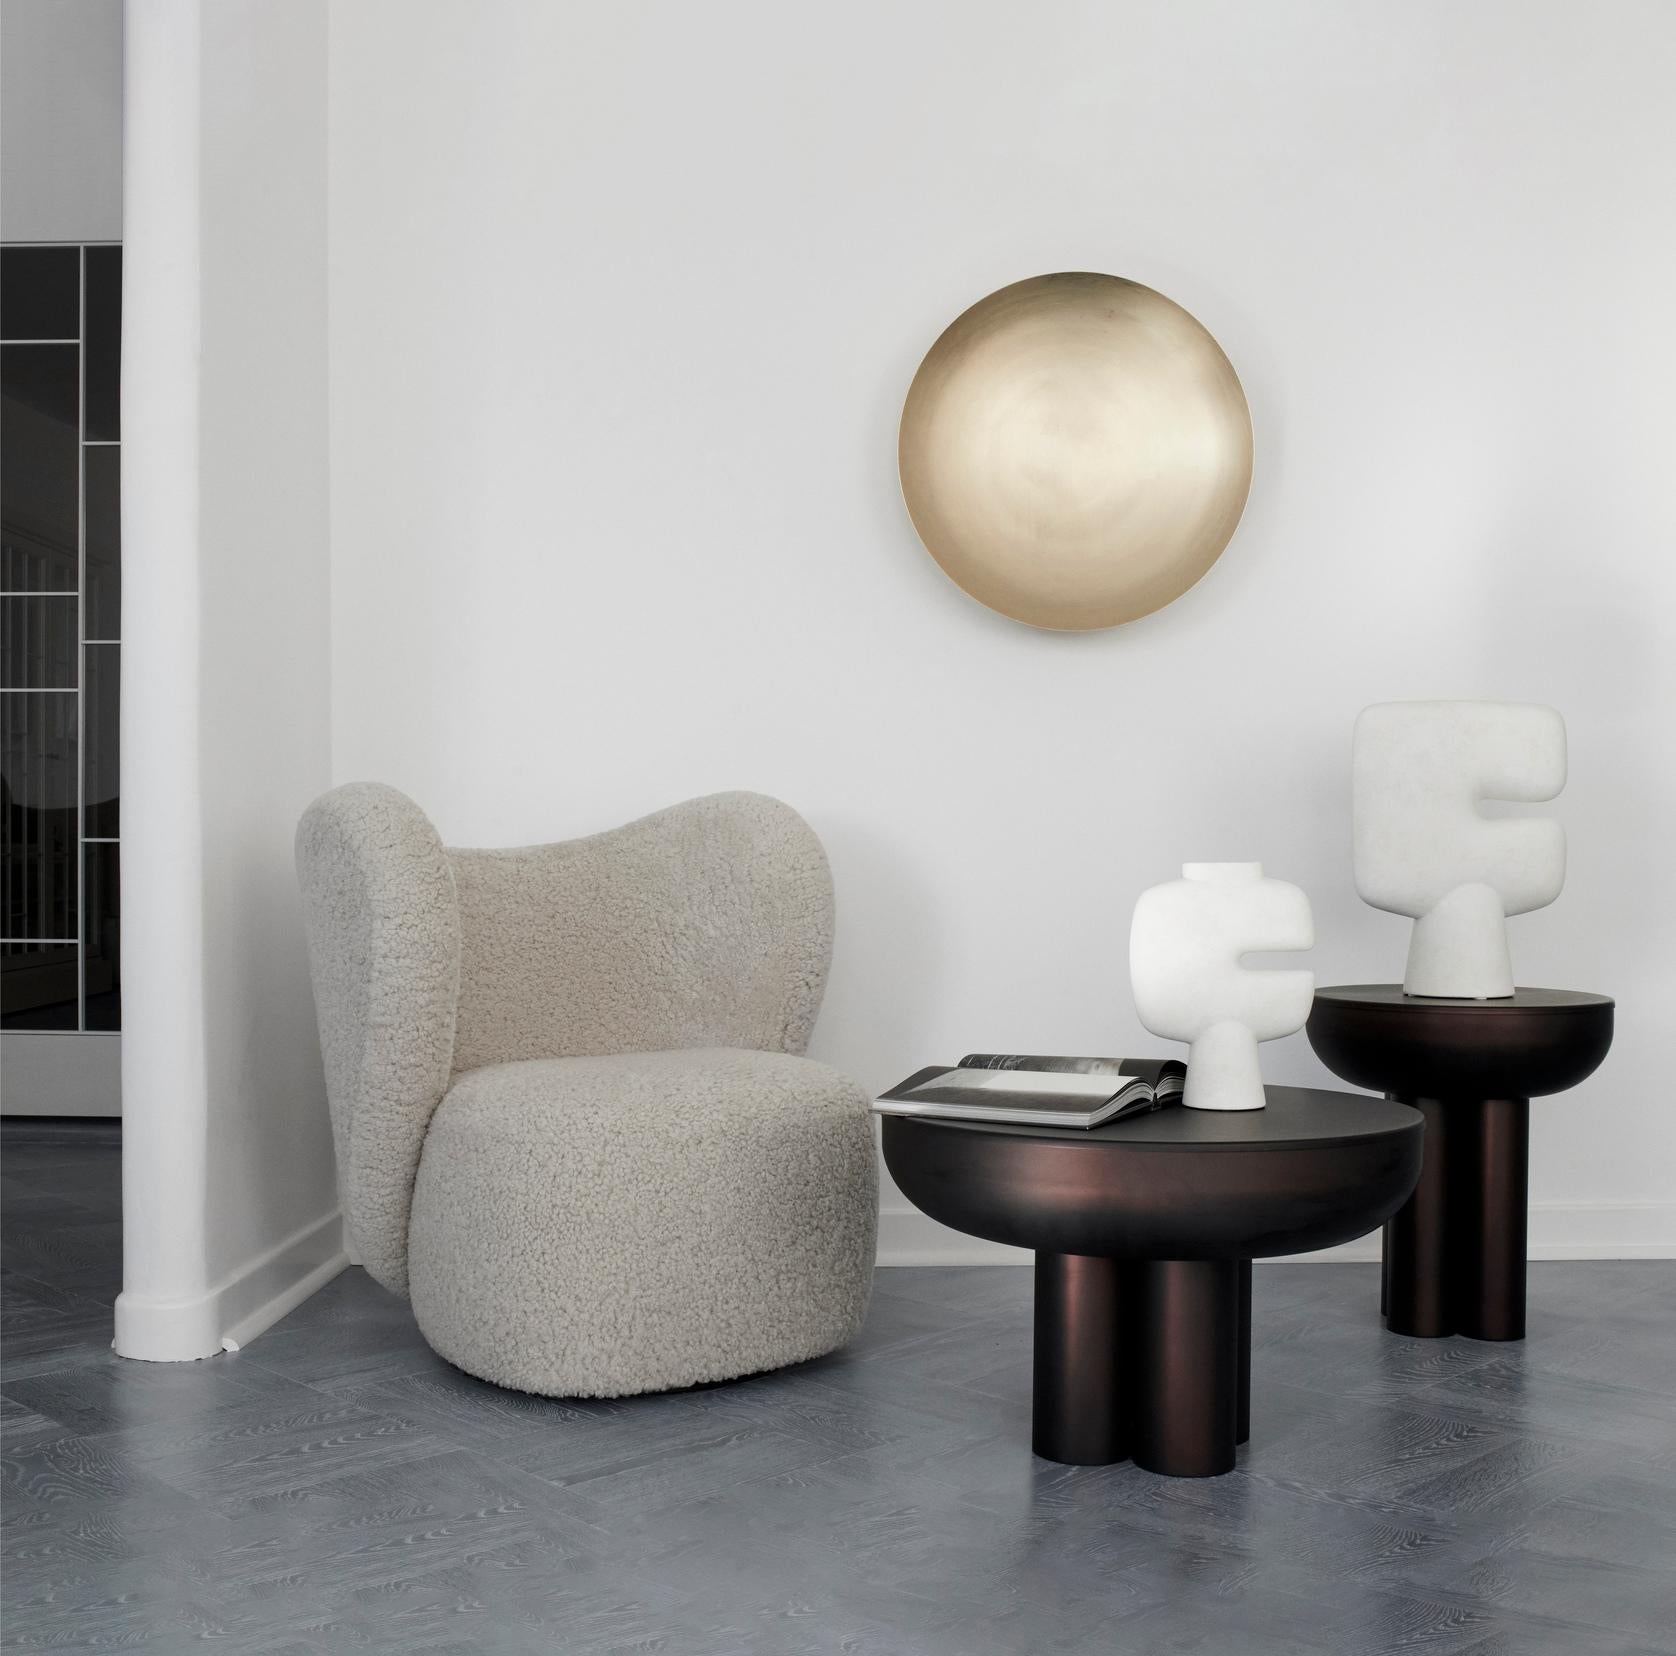 Coffee Crown Table Tall by 101 Copenhagen
Designed by Kristian Sofus Hansen & Tommy Hyldahl
Dimensions: L45 / W45 /H50 CM
Materials: Fiber Concrete

The collection of tables entitled Crown is cast in one piece formed as a circular tabletop